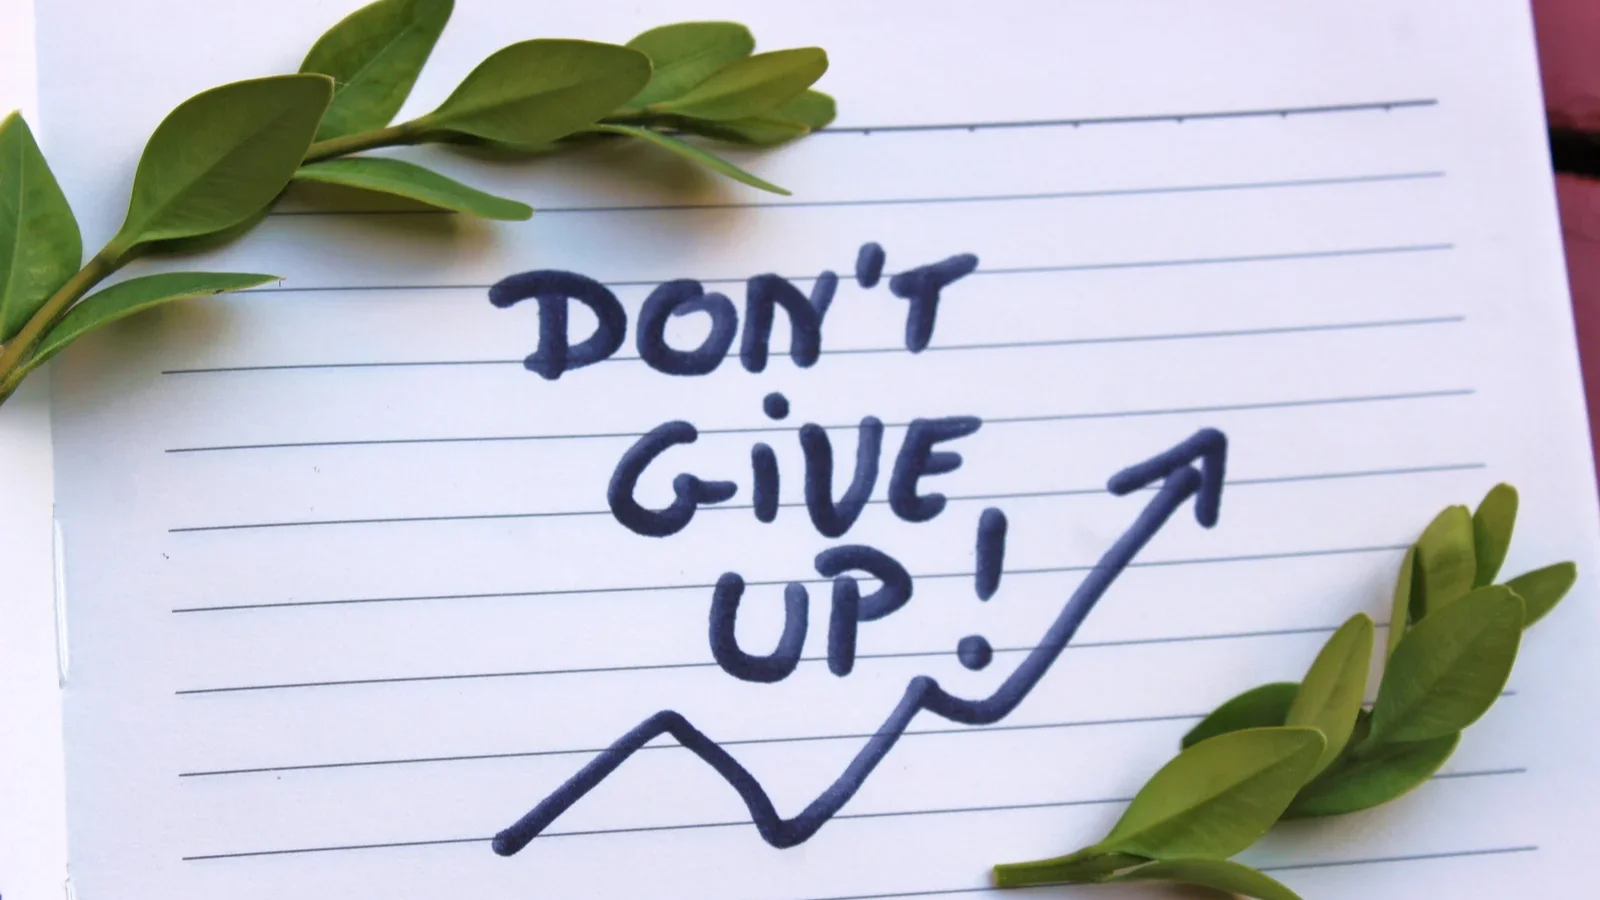 The words don't give up written on a note card